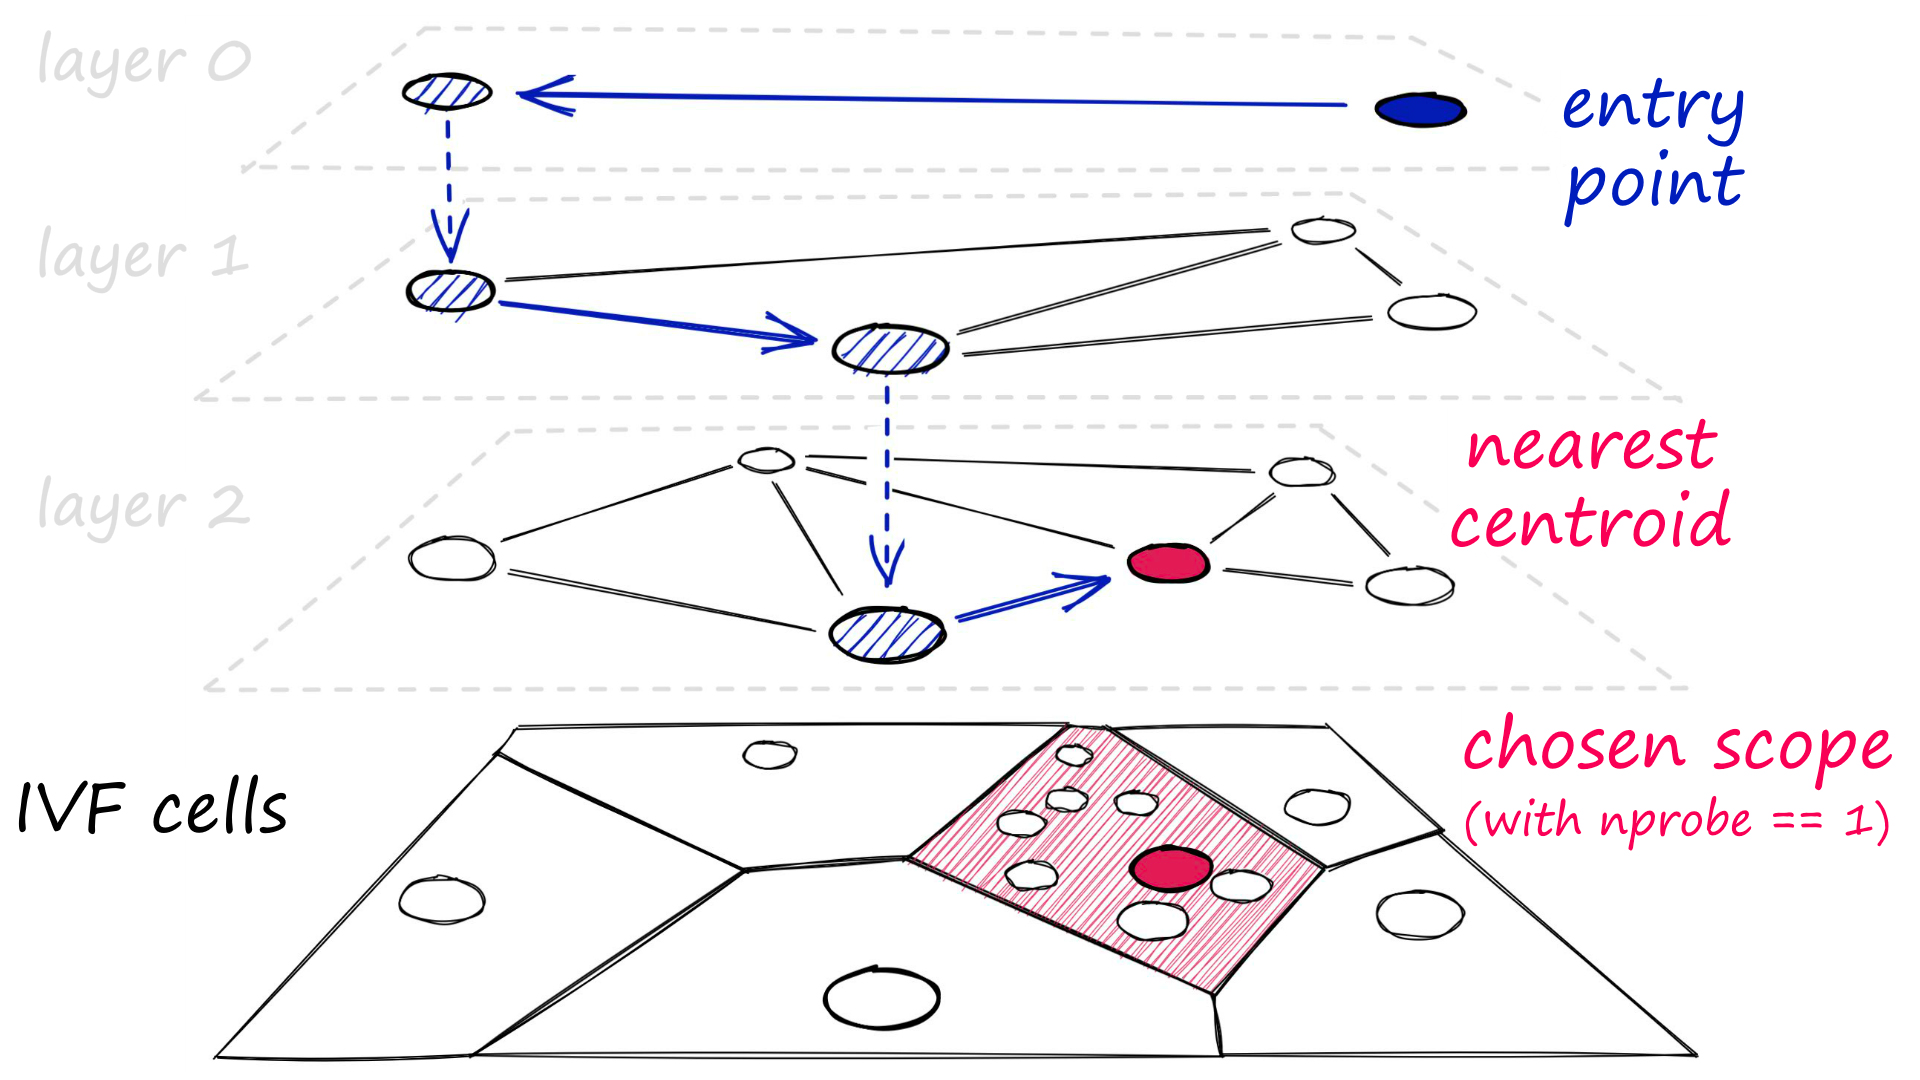 HNSW can be used to quickly find the approximate nearest neighbor using IVF cell centroids.